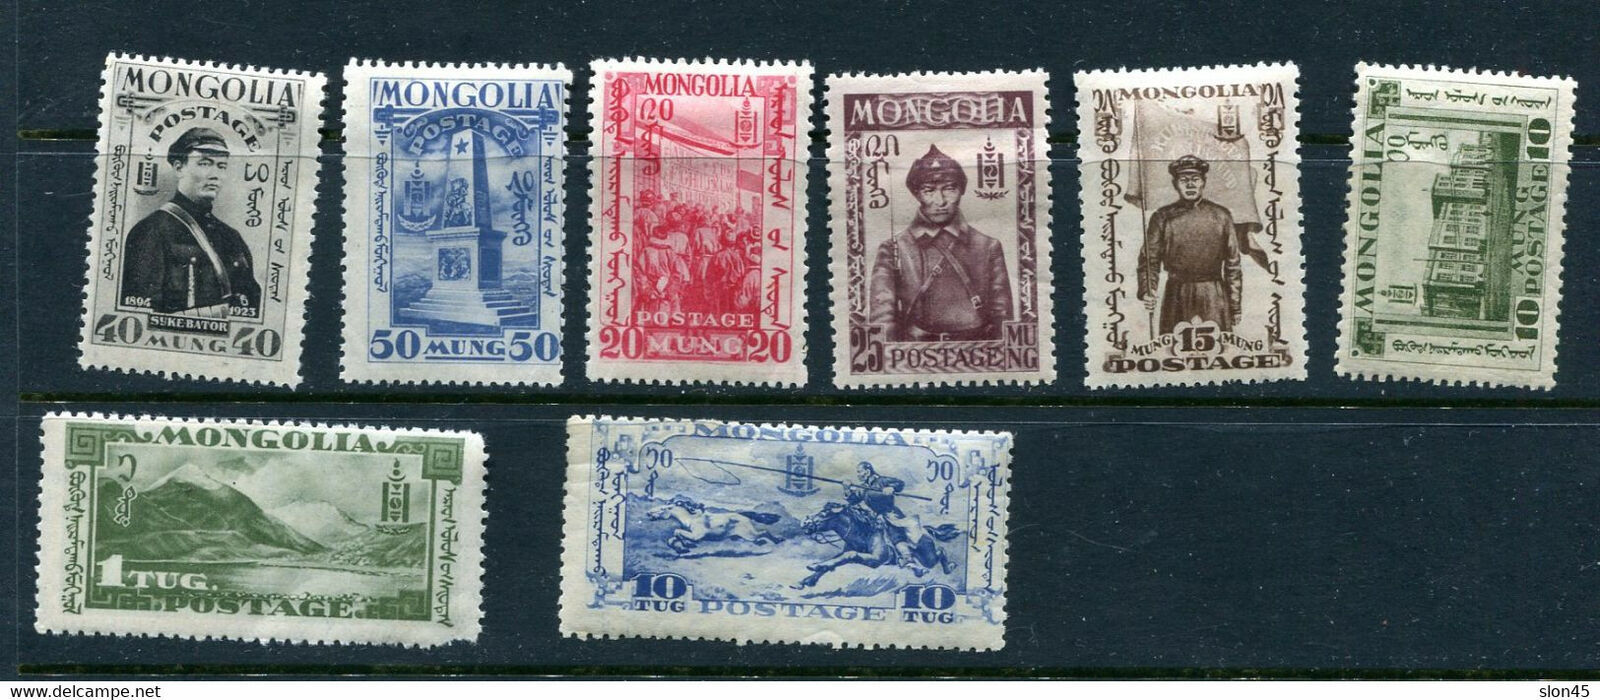 Primary image for Mongolia 1932 Short set Key stamp 10t included MH CV $50 12578